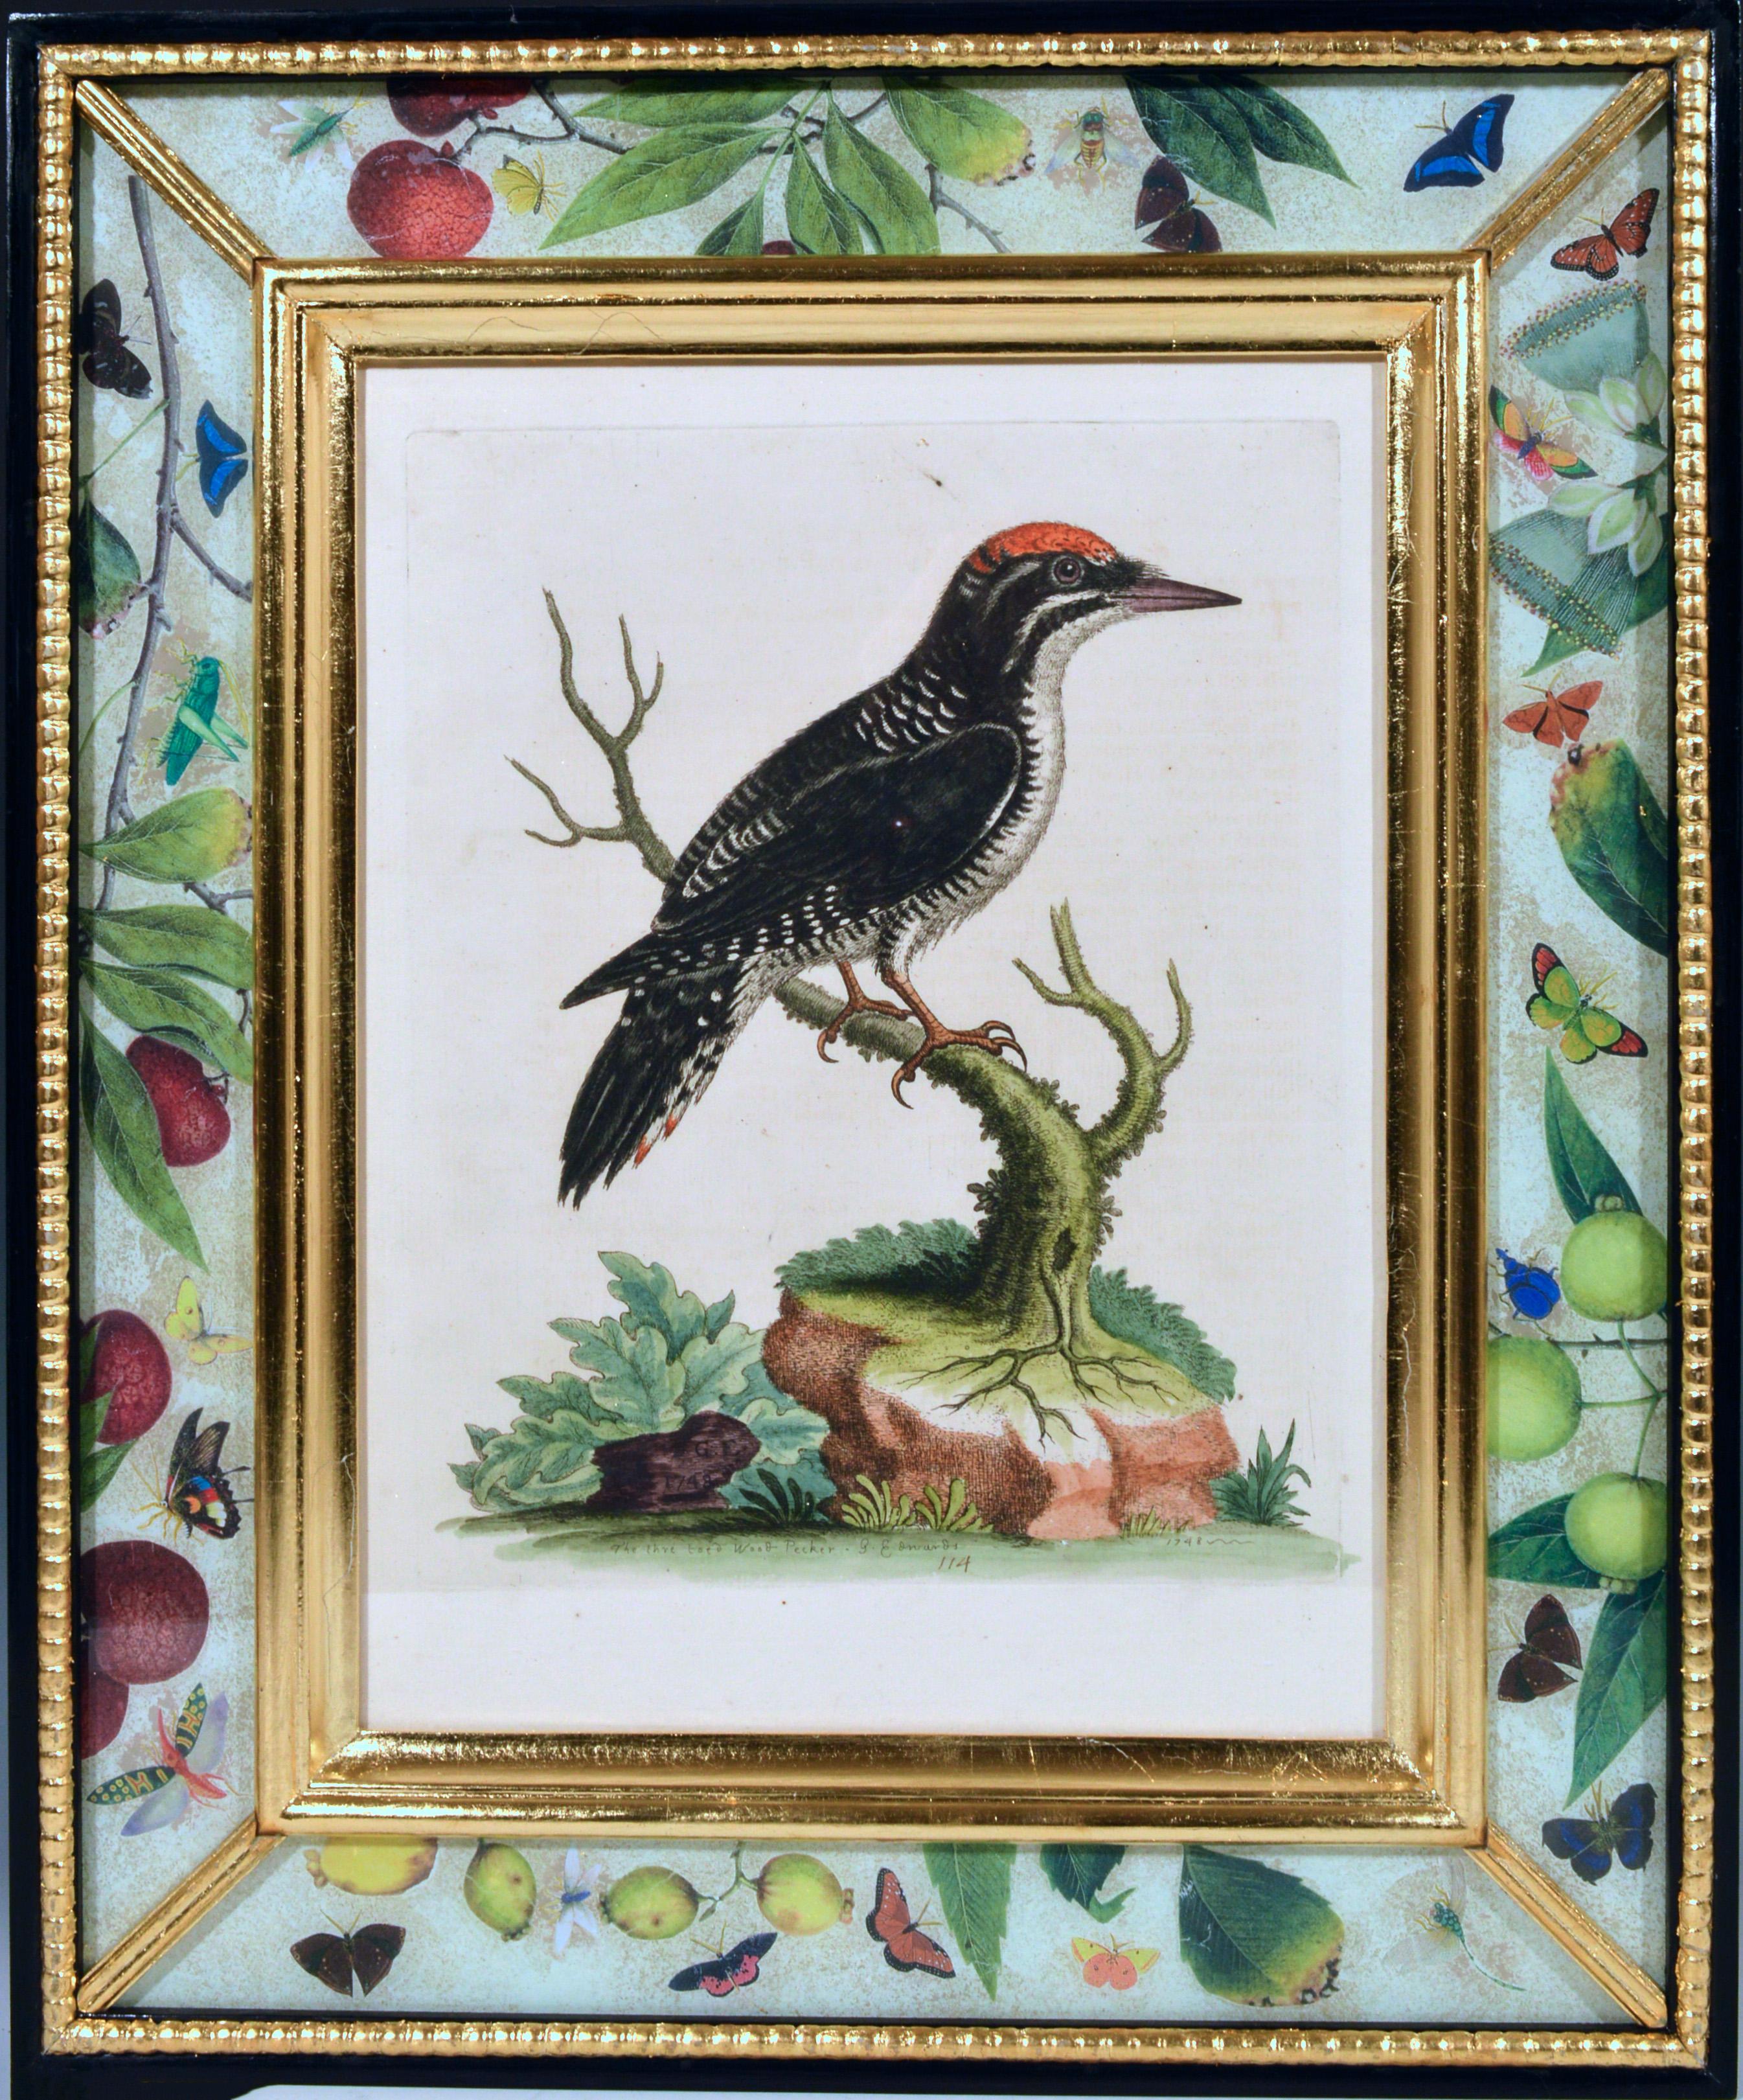 George Edwards engravings of birds,
Set of twelve,
circa 1740-1760.

Twelve different bird engravings within handmade decoupage frames with original hand colouring.

The following plates are included: 114 (the three toed wood-pecker), 122 (The